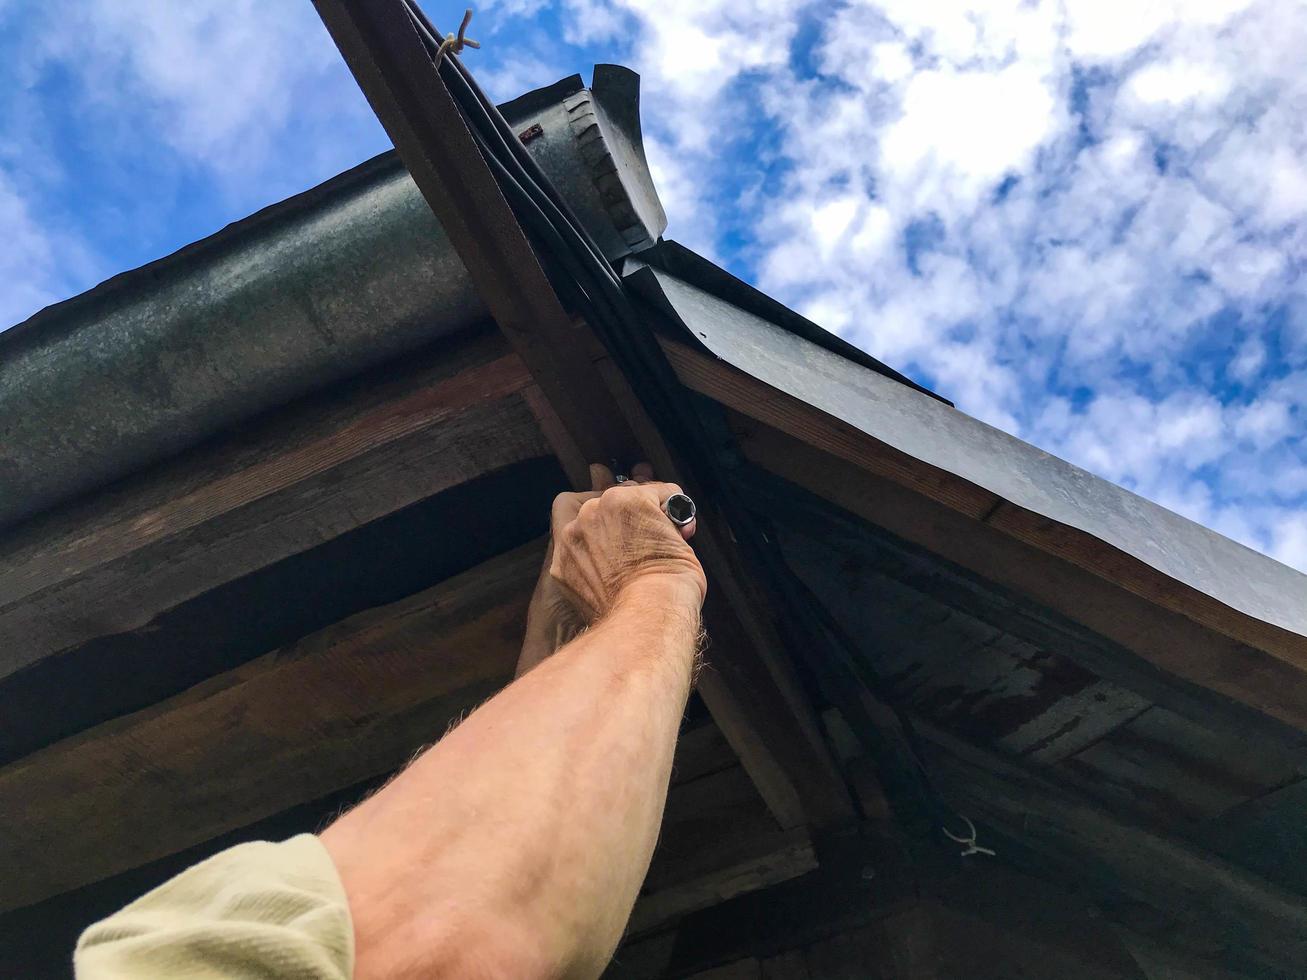 man repairs the roof at a height. manufacturing  in a wooden house. sealing holes, holes in a residential building. roof fitter. repairs the roof with metal tools, tightens the bolts photo